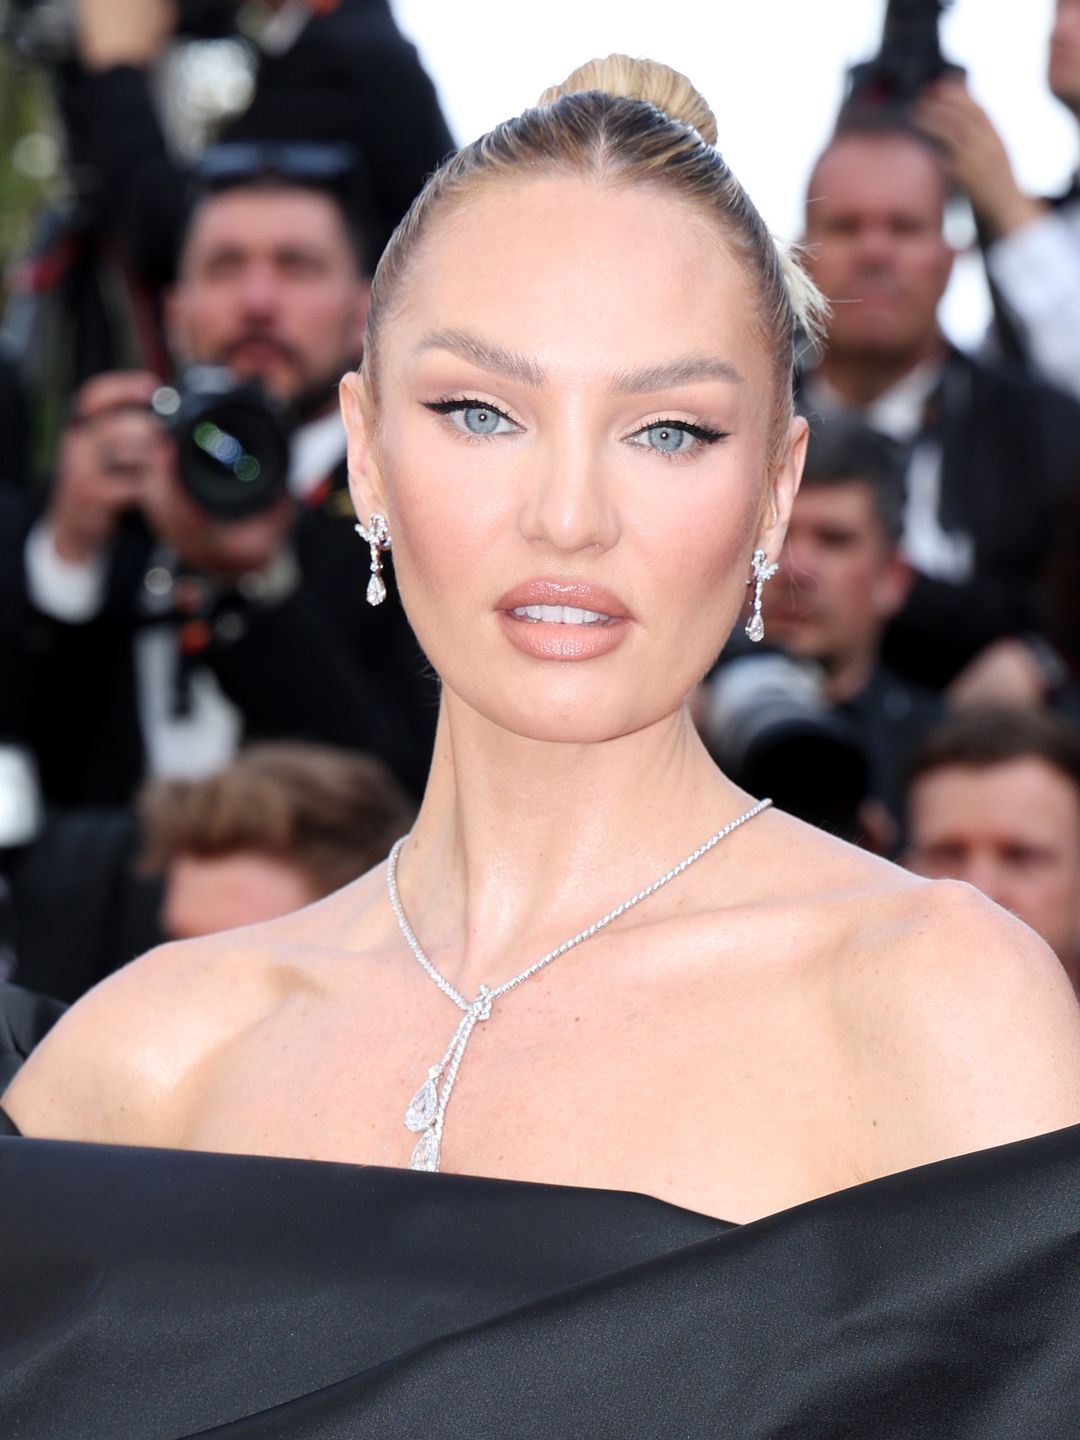 Candice Swanepoel in a black off-the-shoulder gown at Cannes 